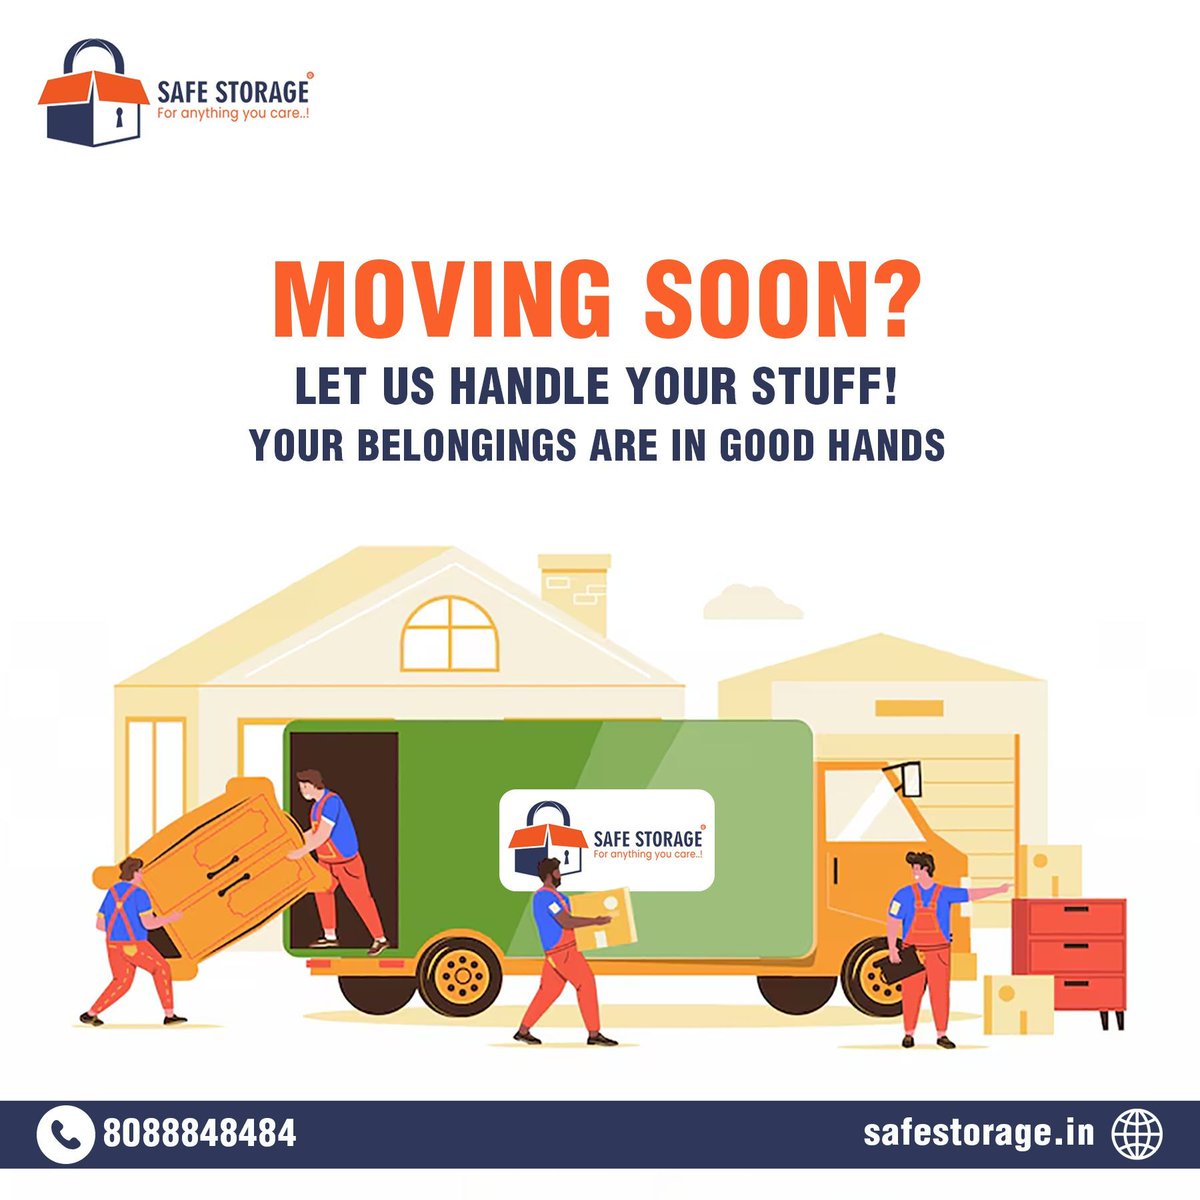 Secure your peace of mind with SafeStorage – let us handle your belongings as you move. Your stuff, our care. 

For more details:
Visit our website -buff.ly/2pK6eaM
Call now: 8088848484
#SafeStorage #StorageFacility #SecureStorage #SelfStorage #explore #SpaceSolution